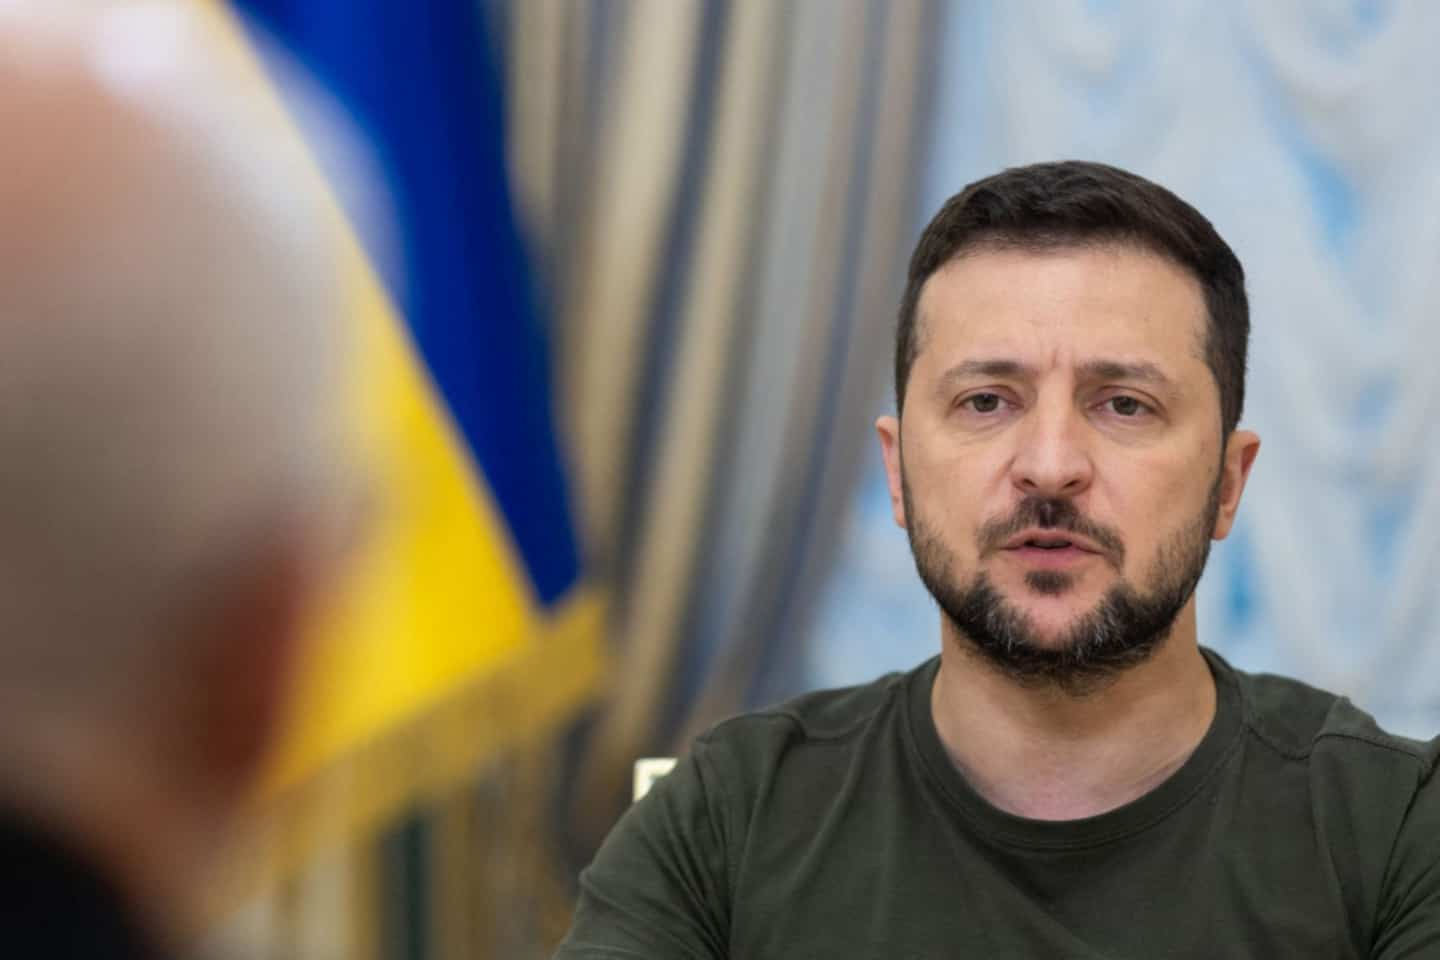 Gas: Zelensky calls on Europe to strengthen sanctions against Russia